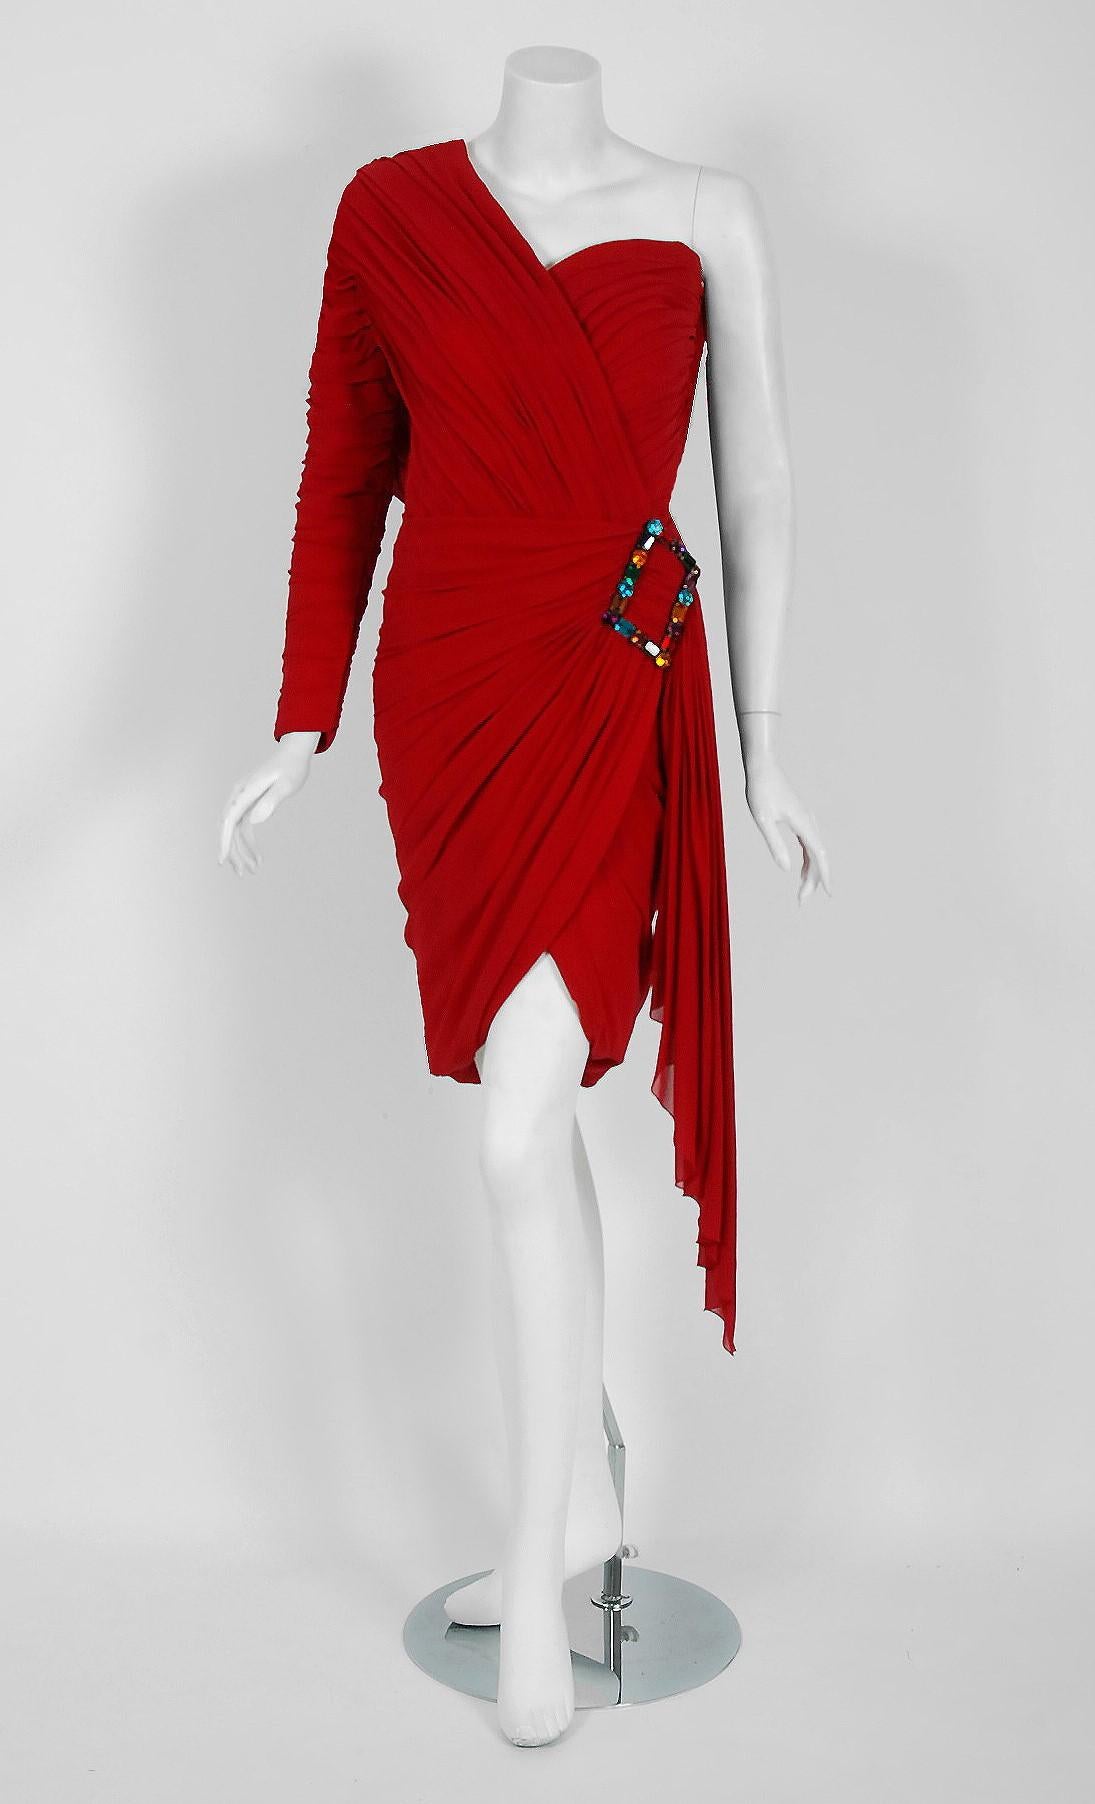 This seductive silk-crepe cocktail, in the most beautiful silhouette, is pure couture perfection. Jean Patou's affinity for tailored design and elaborate materials is wonderful for the modern woman. After Jean Patou's death in 1936, Henri Giboulet